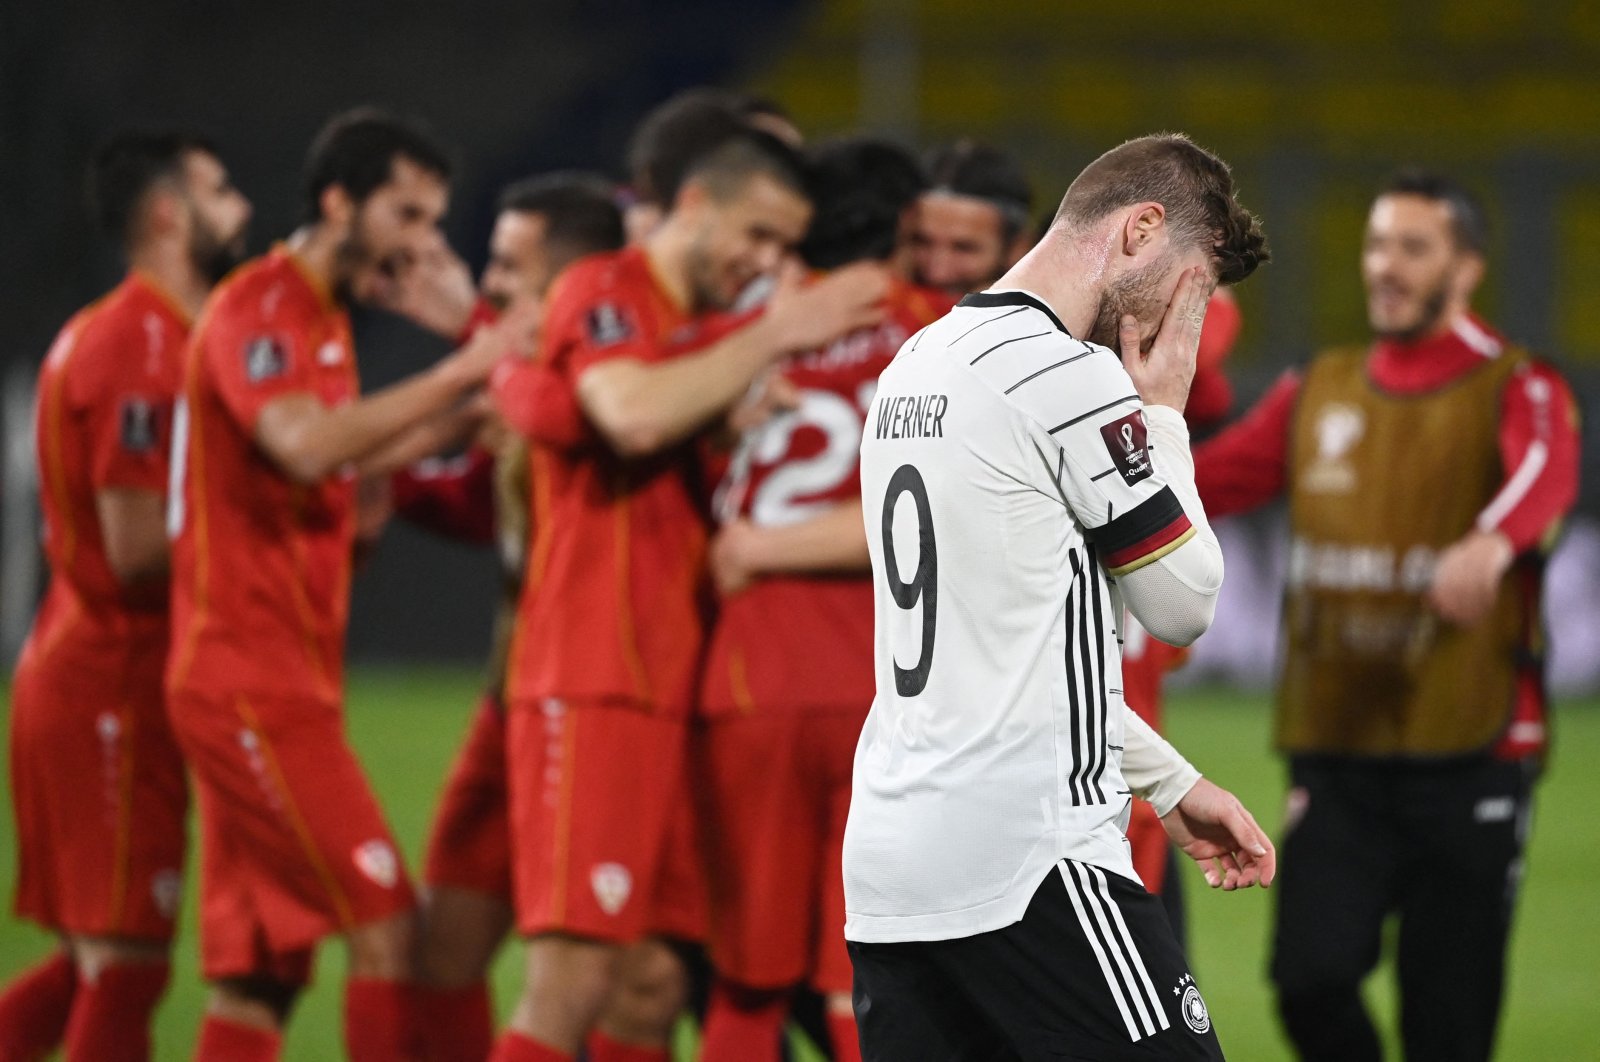 North Macedonia players celebrate as Germany's forward Timo Werner walks past after the FIFA World Cup Qatar 2022 qualification Group J match in Duisburg, western Germany, March 31, 2021. (AFP Photo)